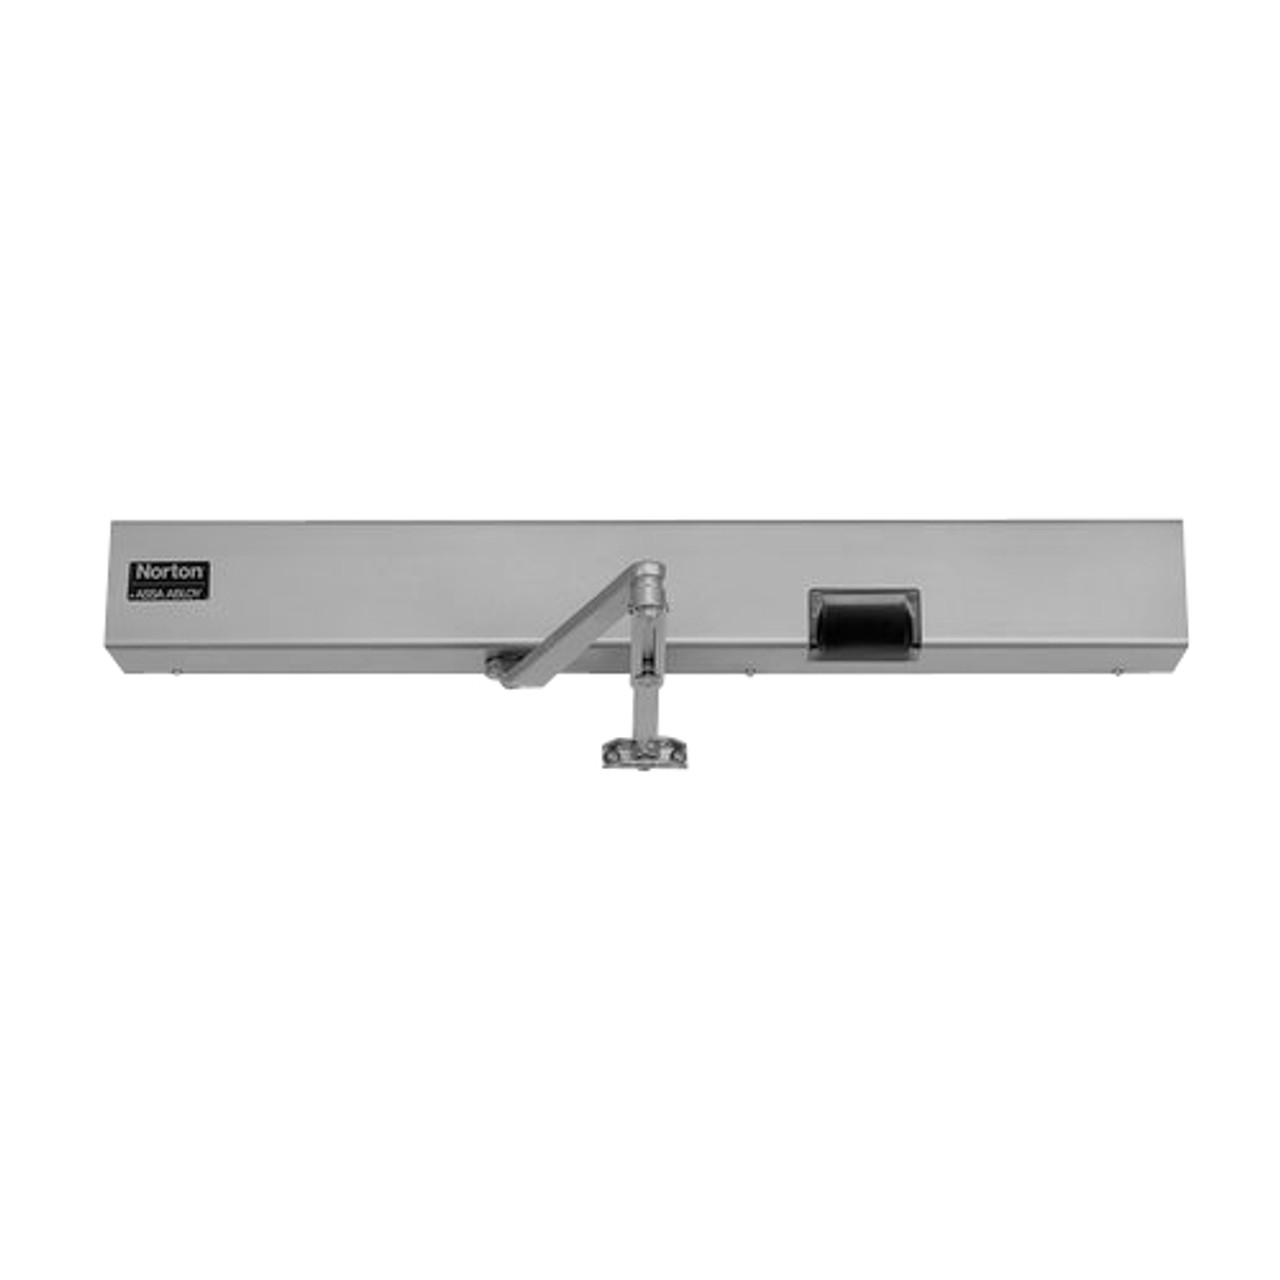 7122SZ-RH-120VAC-689 Norton 7100SZ Series Safe Zone Multi-Point Closer/Holder with Motion Sensor and Push Side Double Lever 11 inch Main Arm in Aluminum Finish